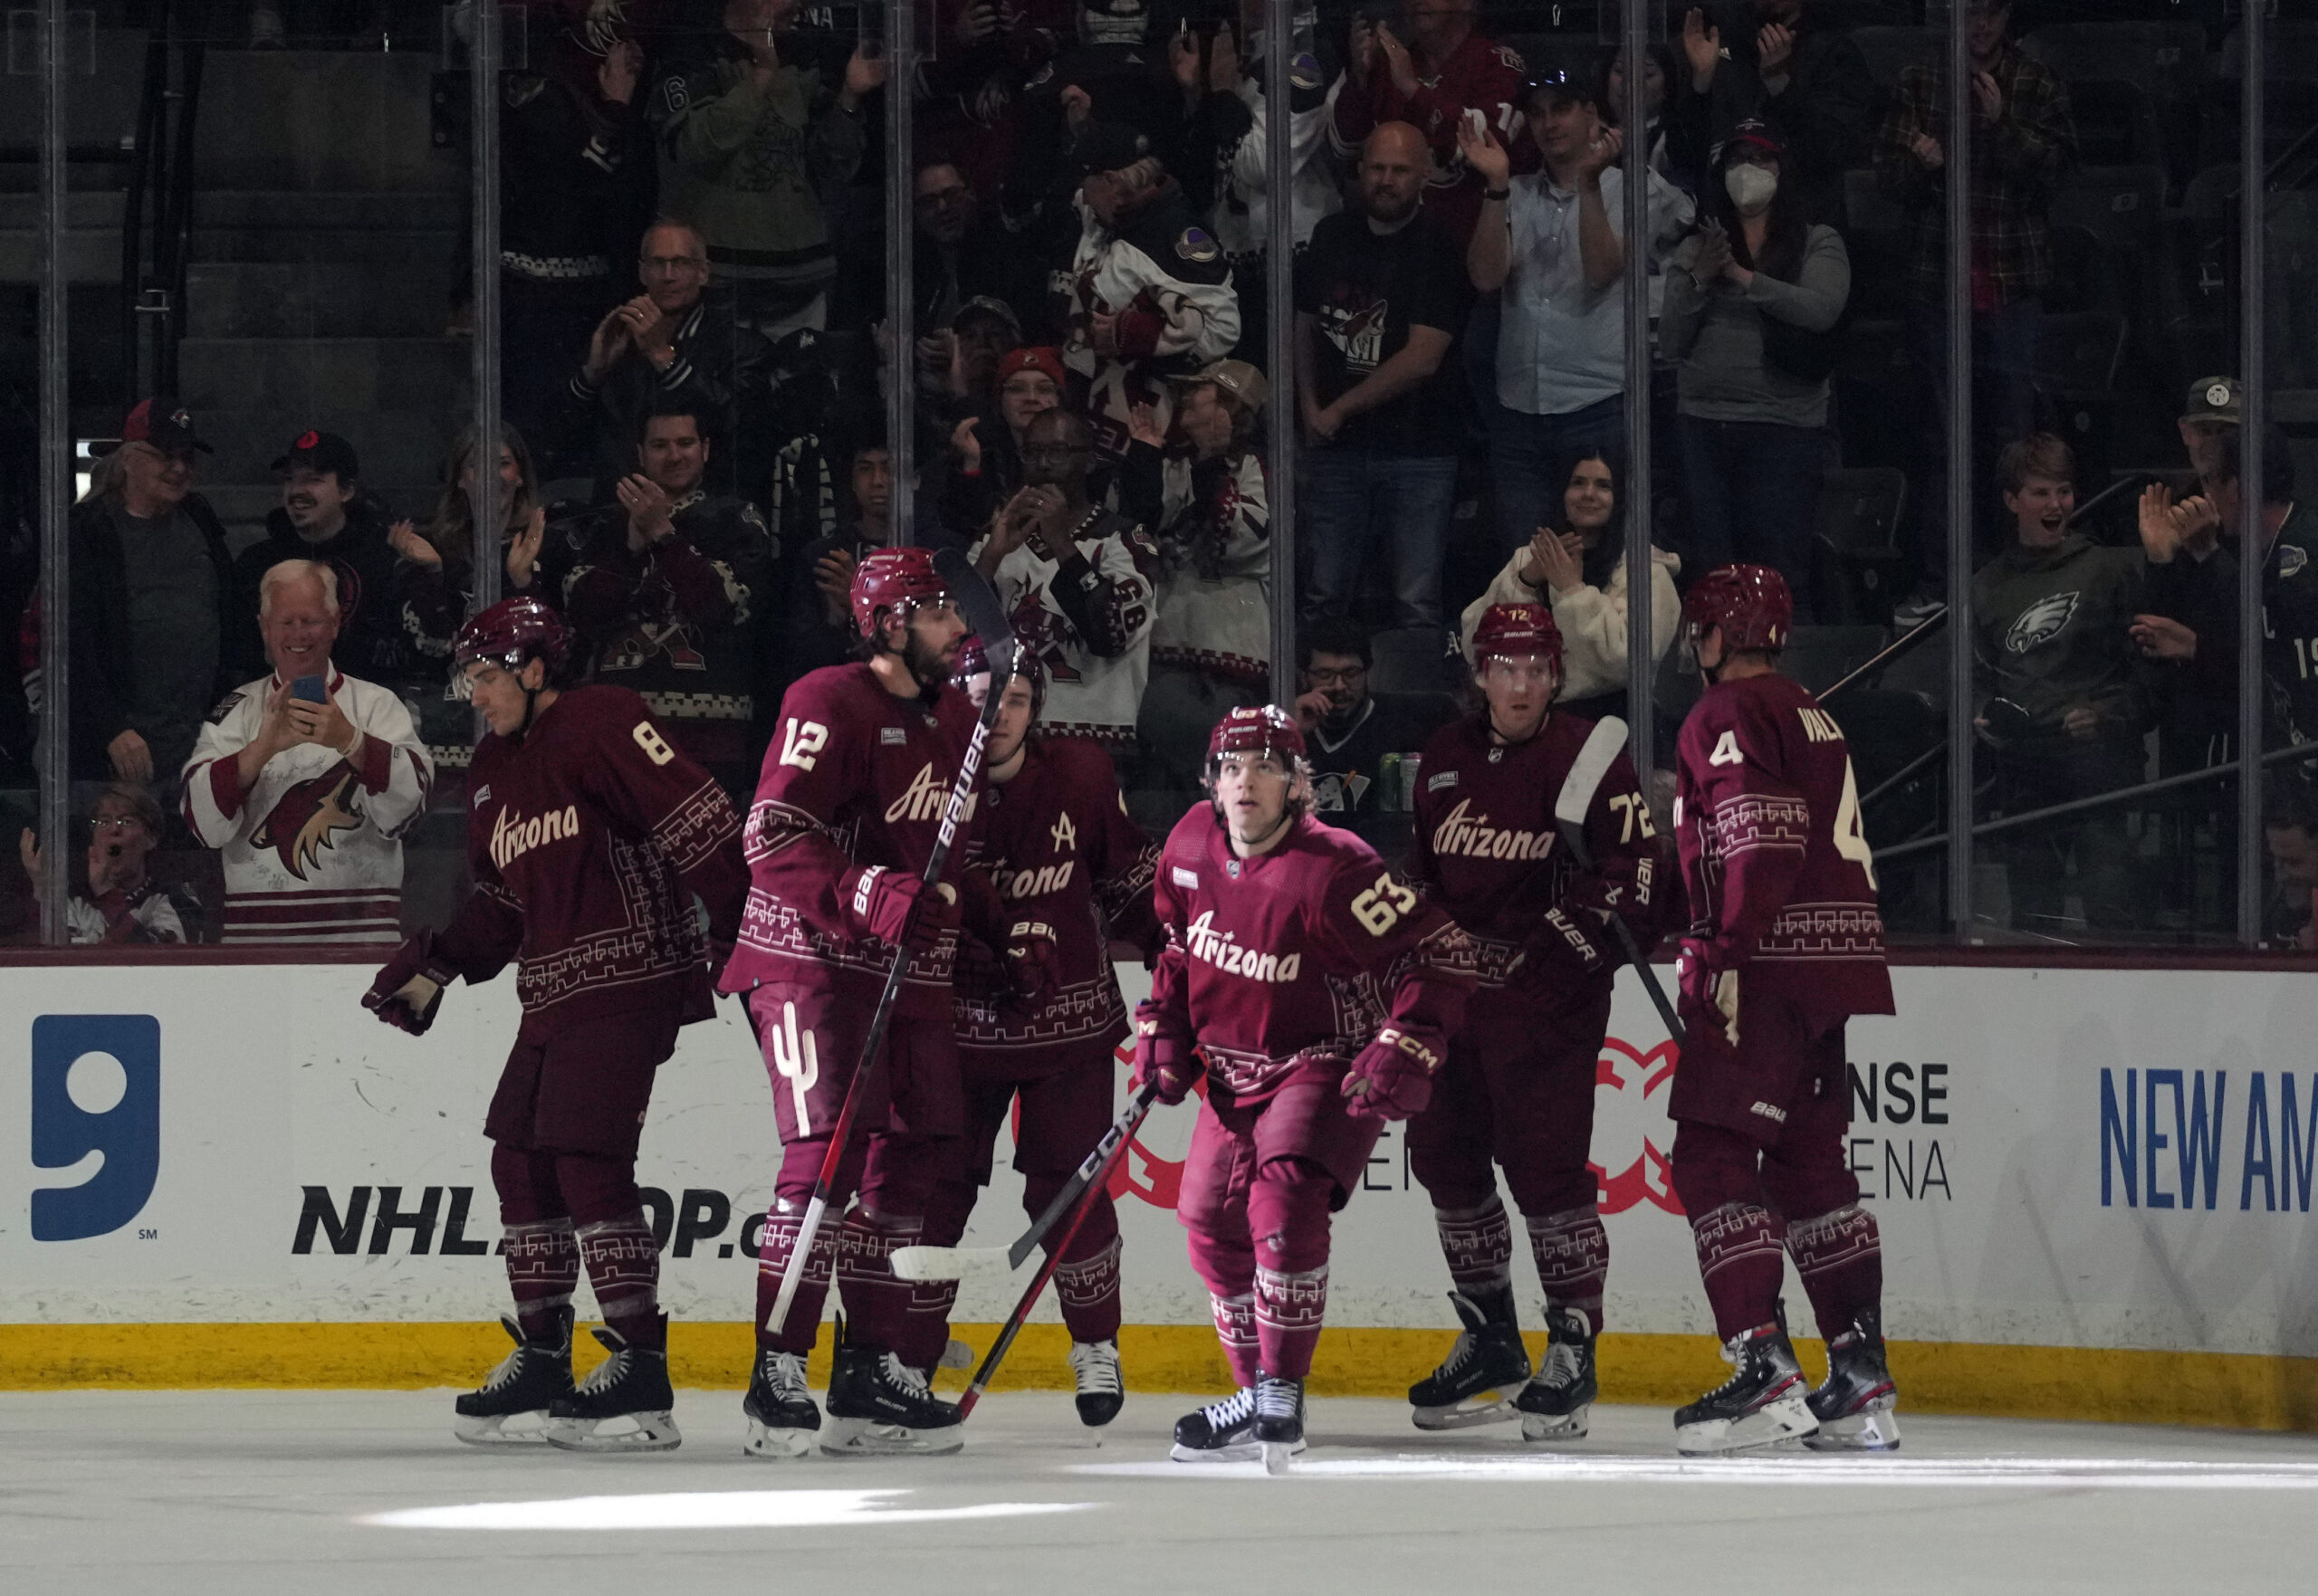 Coyotes to play 2022-23 season in newly named 'Mullett Arena